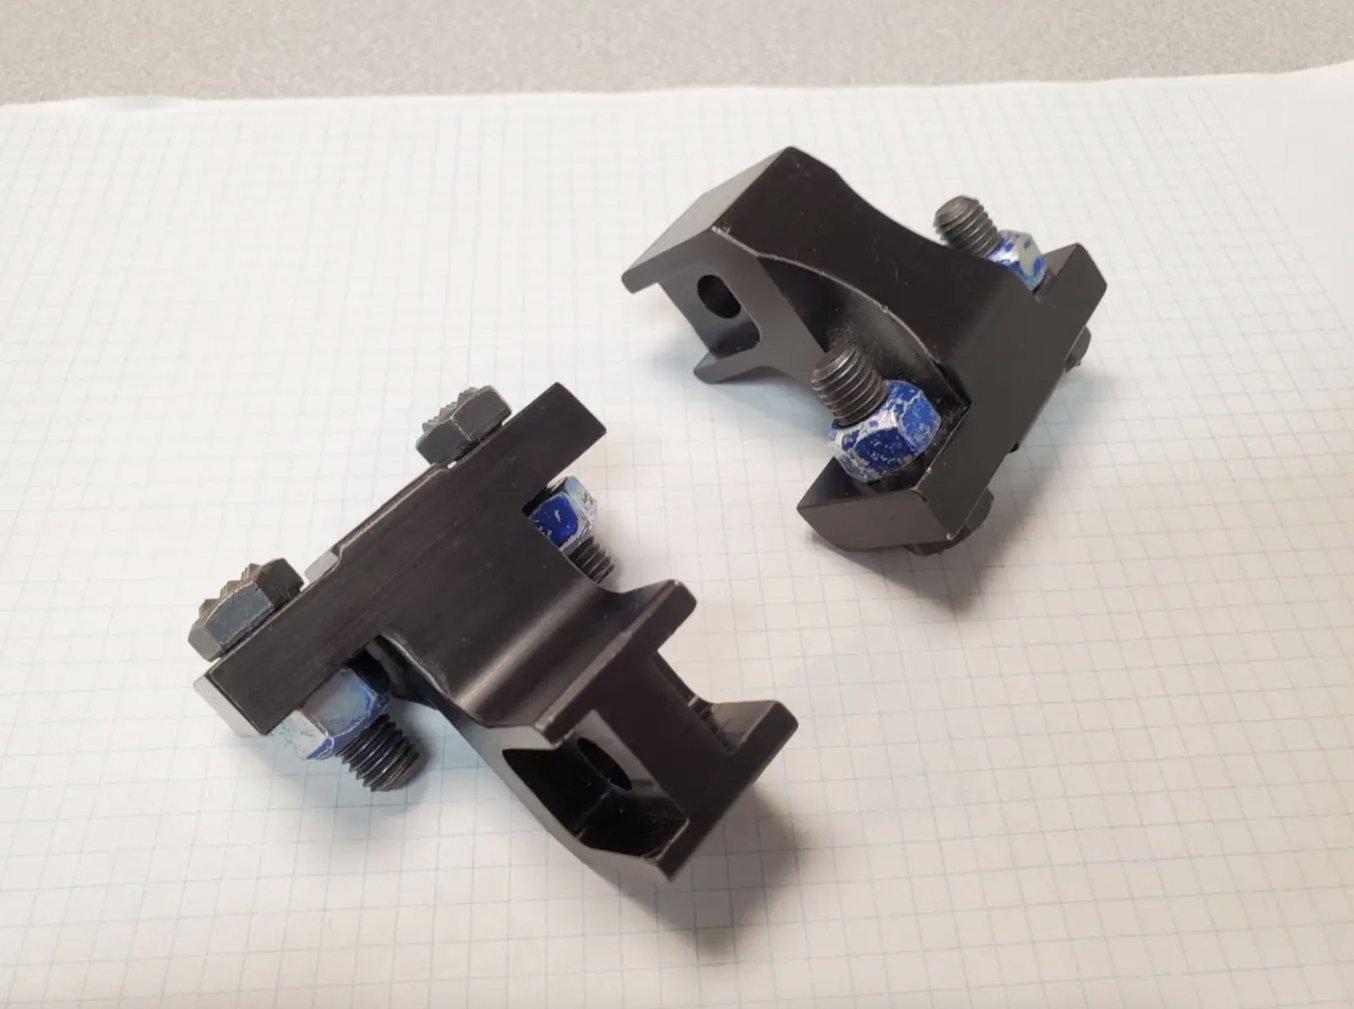 generic grippers that were originally installed on the pneumatic cylinder